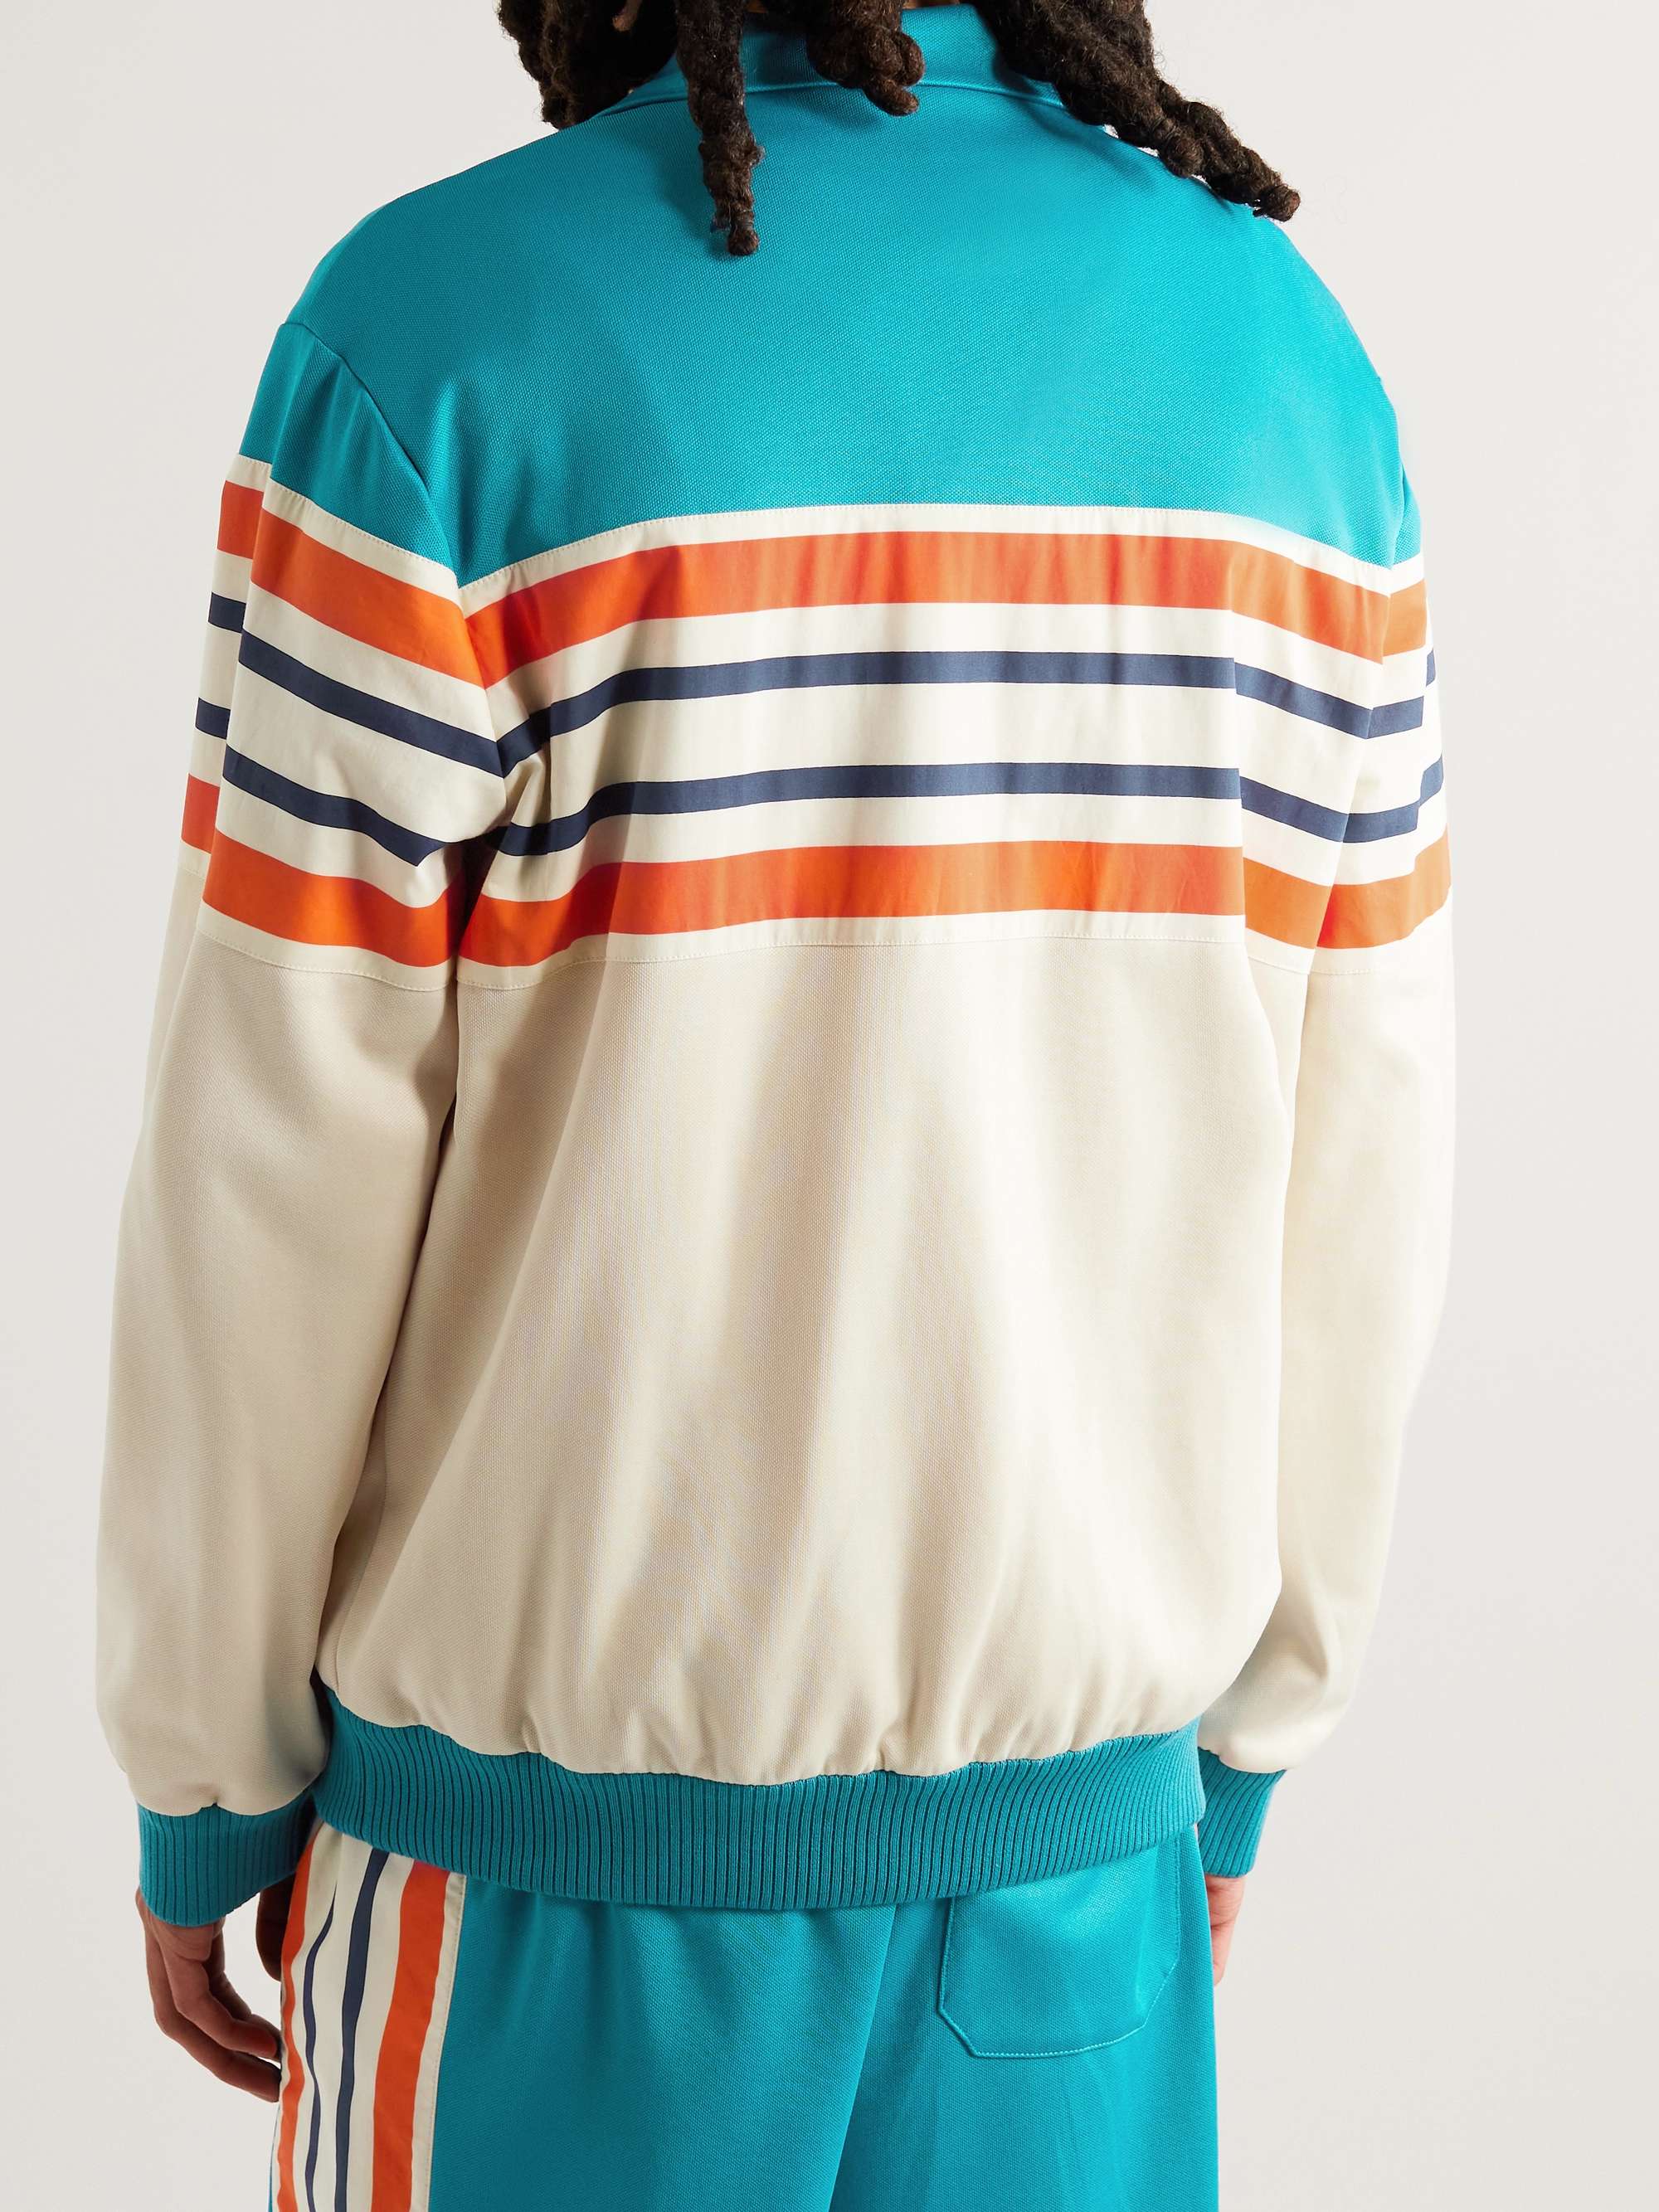 GUCCI Striped Canvas-Trimmed Tech-Jersey Track Jacket